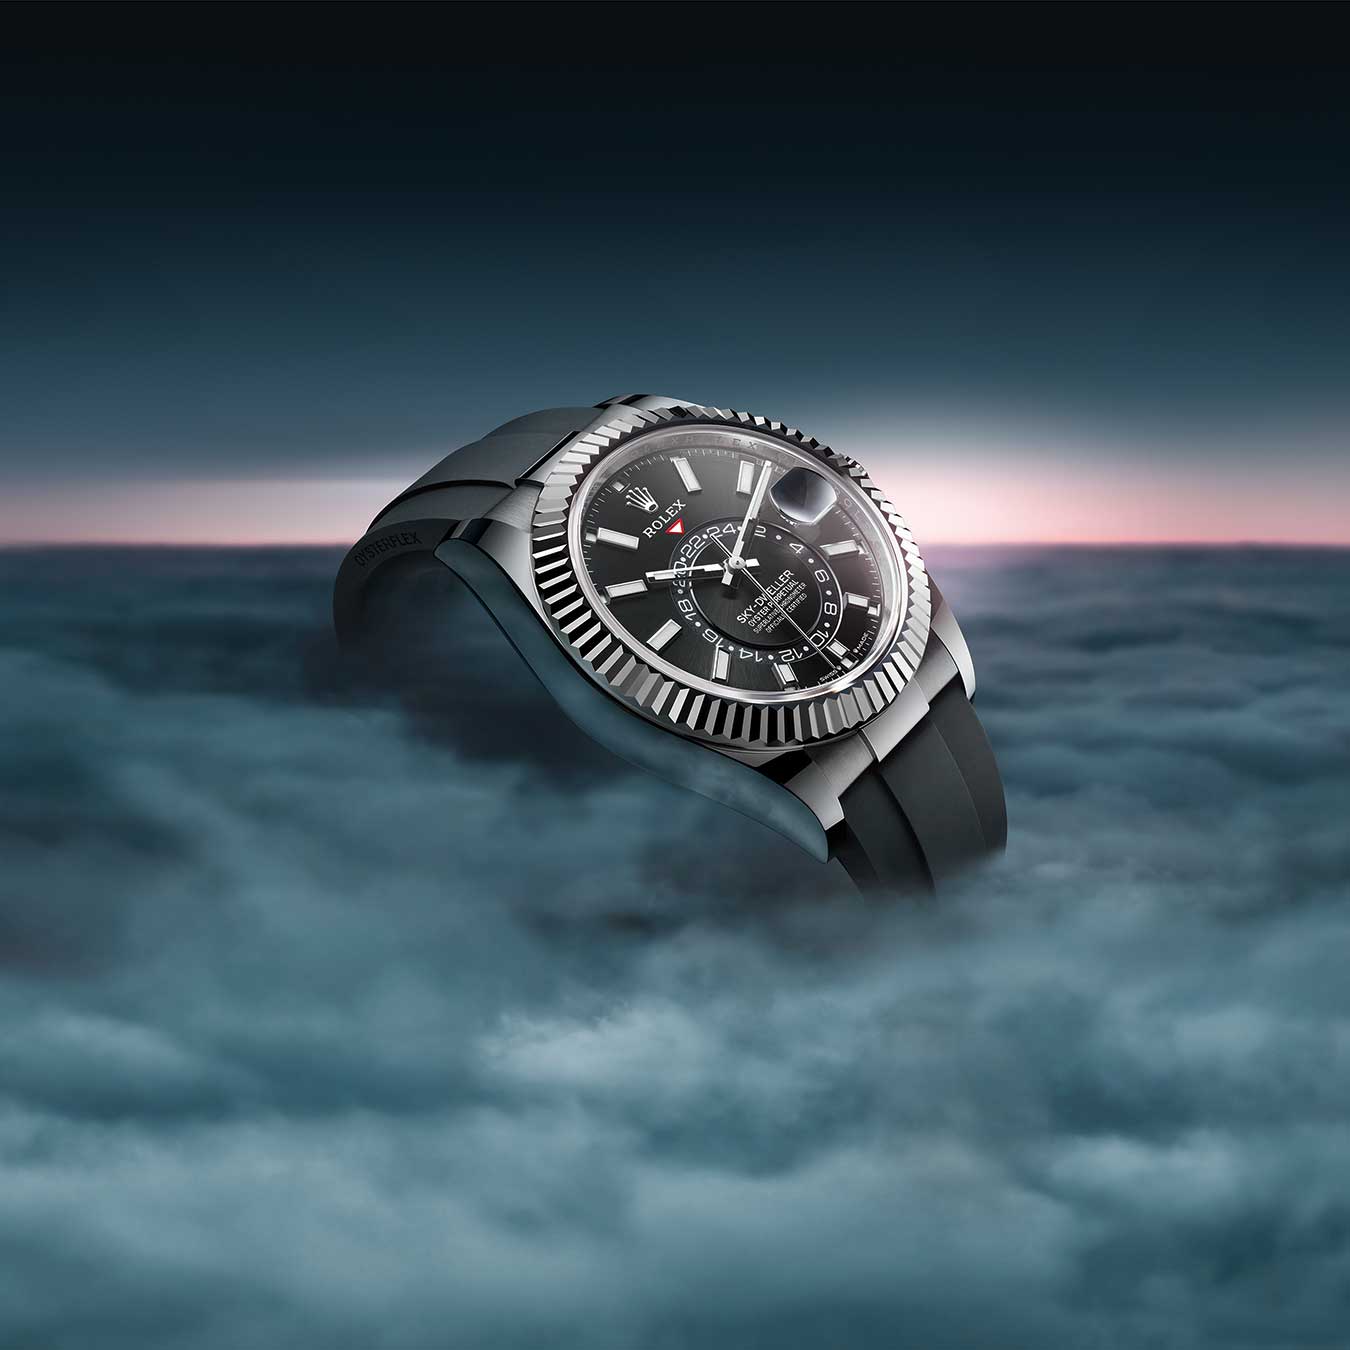 Rolex Sky-Dweller with Bright Black Dial and Oysterflex Bracelet in Clouds